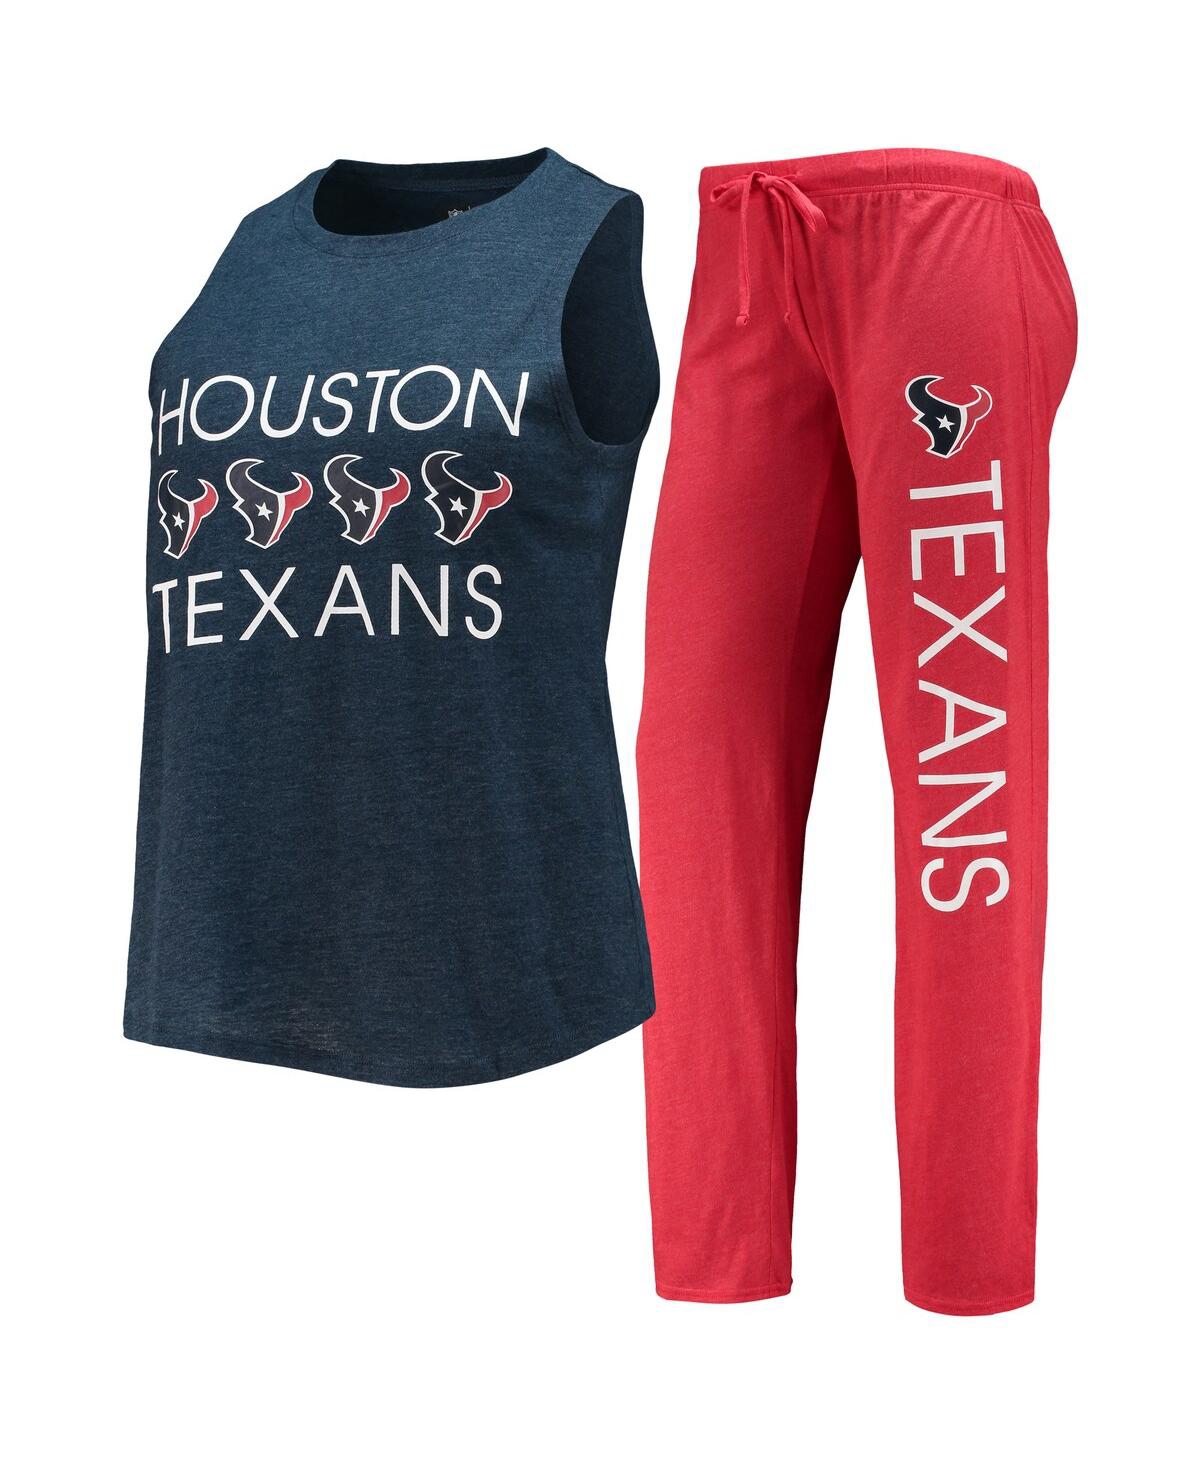 Women's Concepts Sport Red, Navy Houston Texans Muscle Tank Top and Pants Sleep Set - Red, Navy